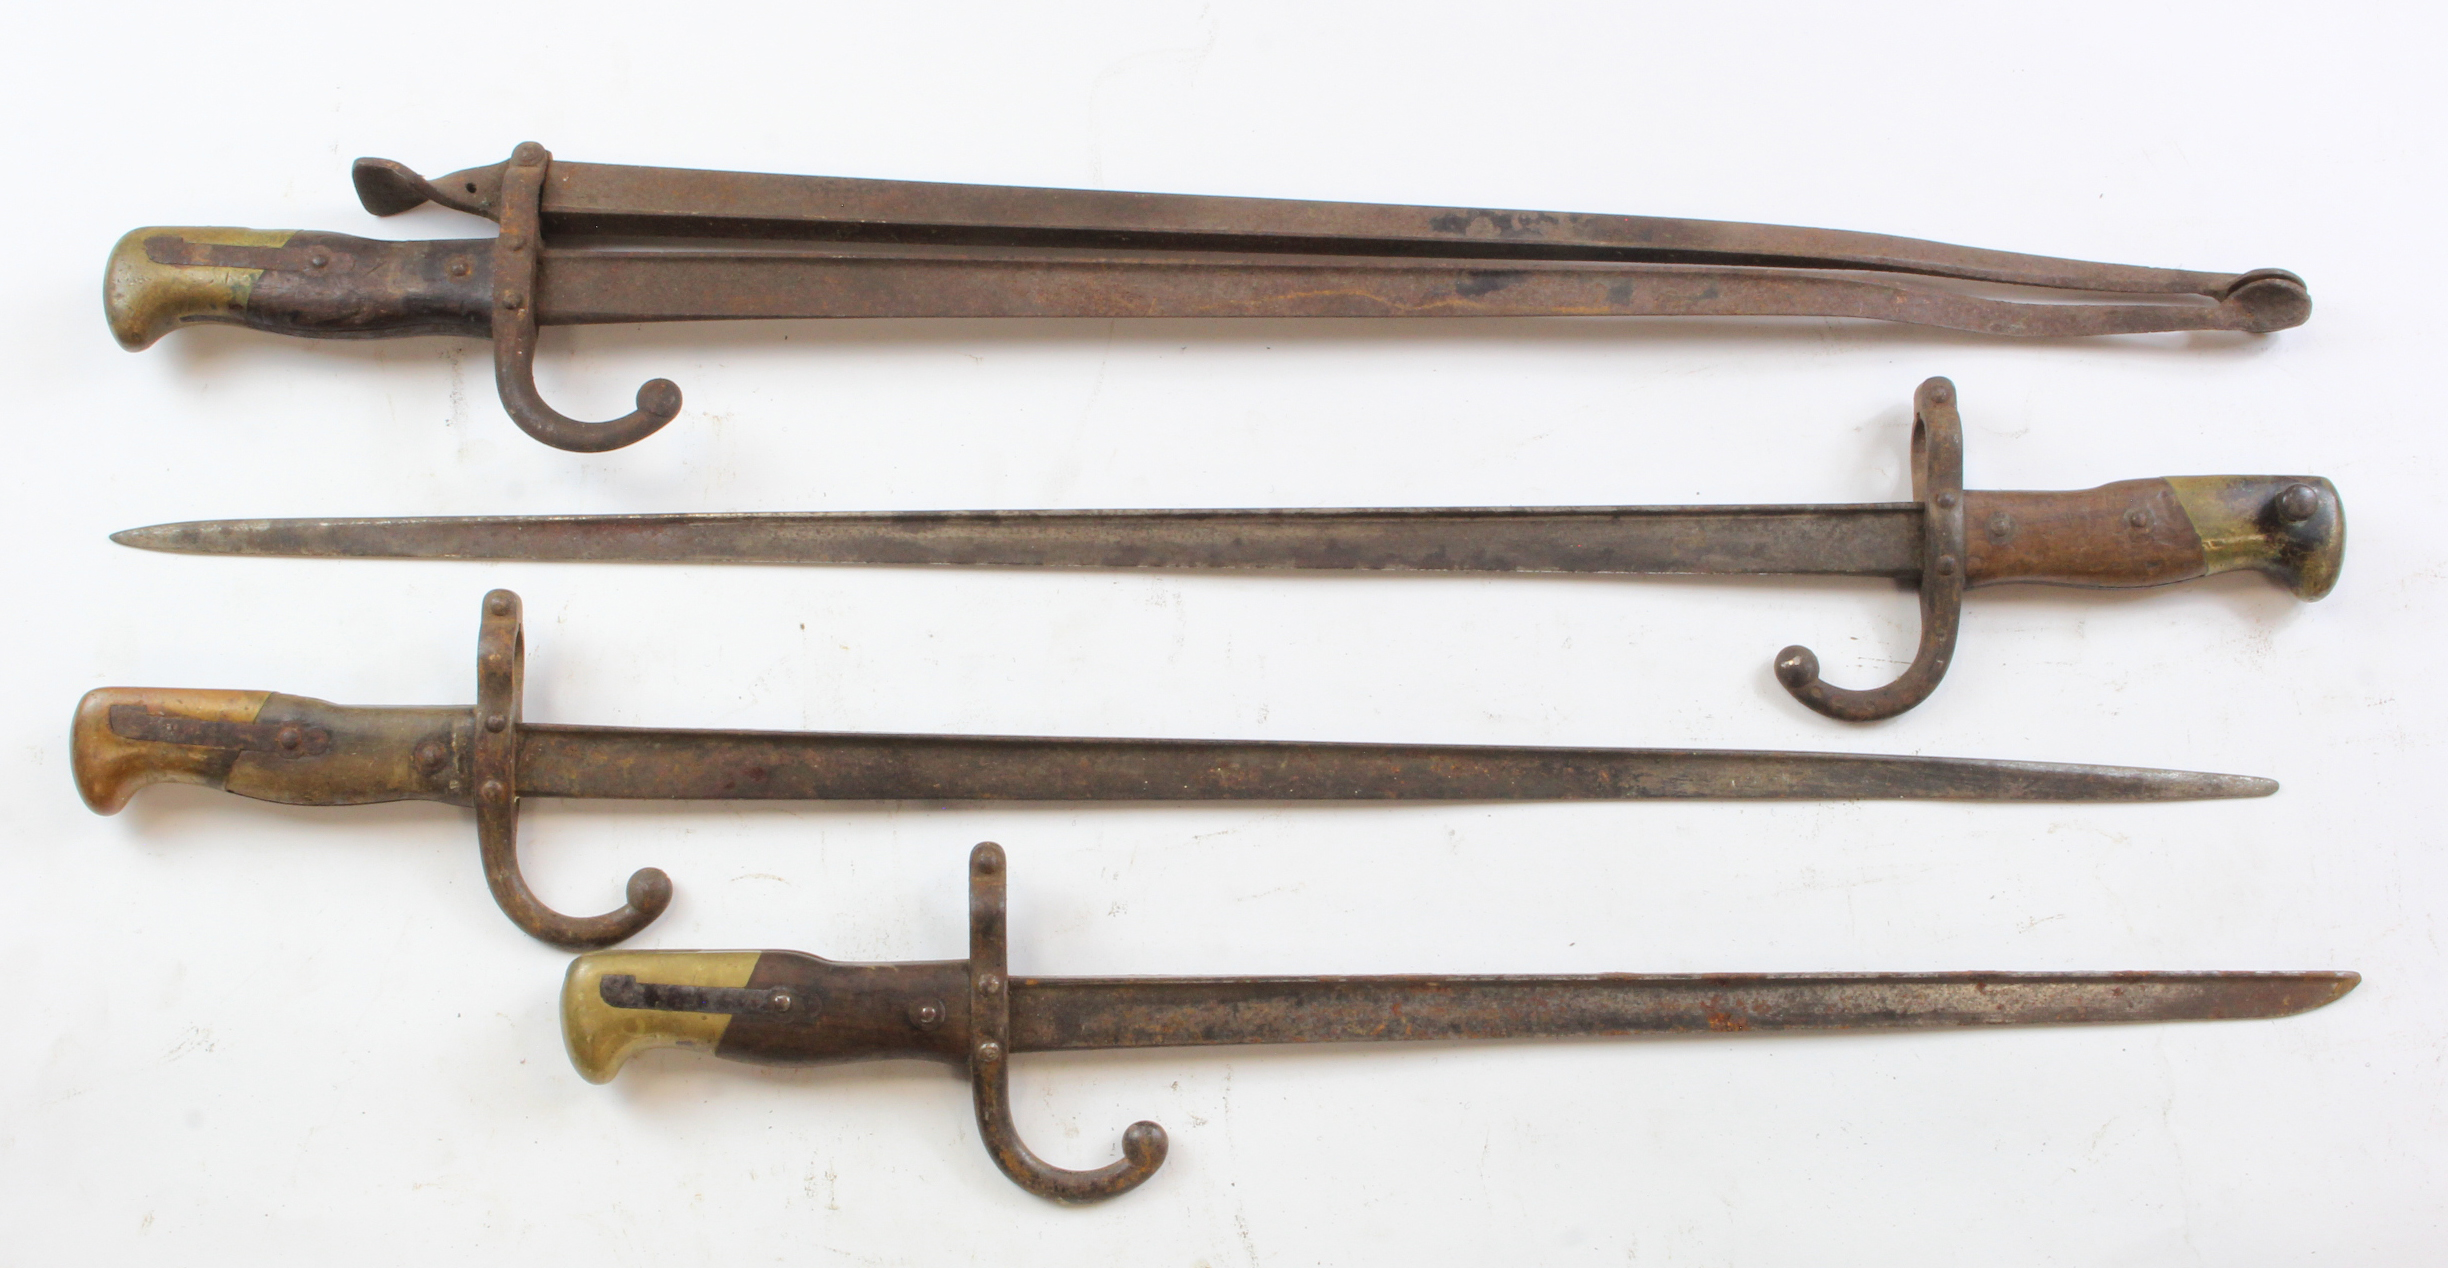 Bayonets - French Gras Epee Model 1874 Bayonets without scabbards. Chatellerault 1876. St Etienne